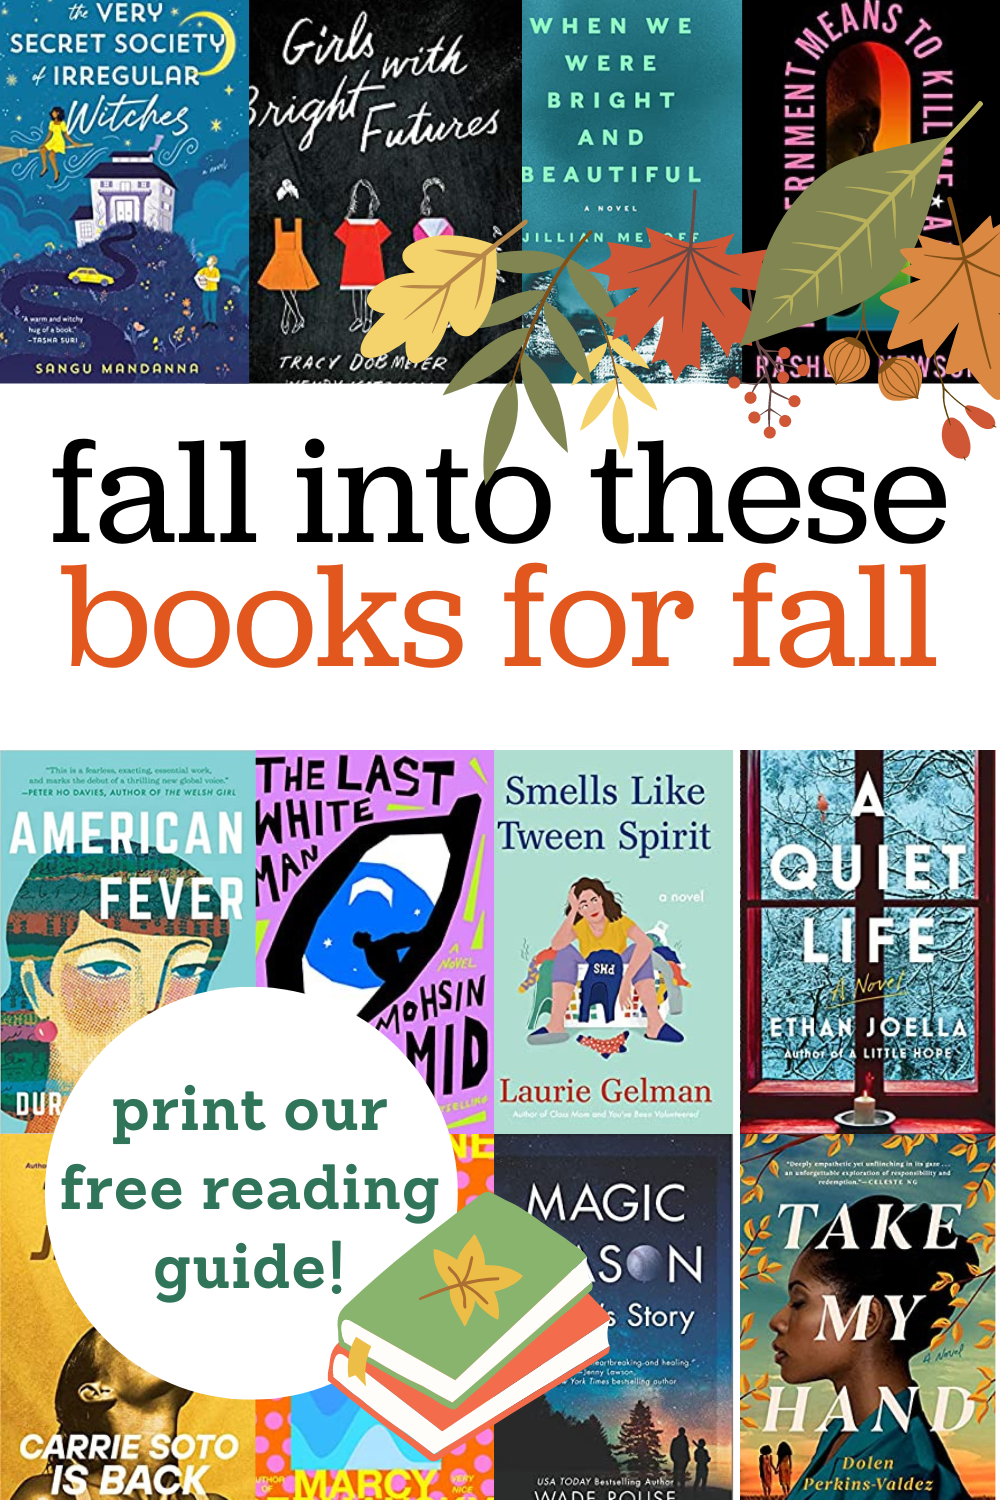 19 New Books to Read This Fall (PRINTABLE GUIDE)